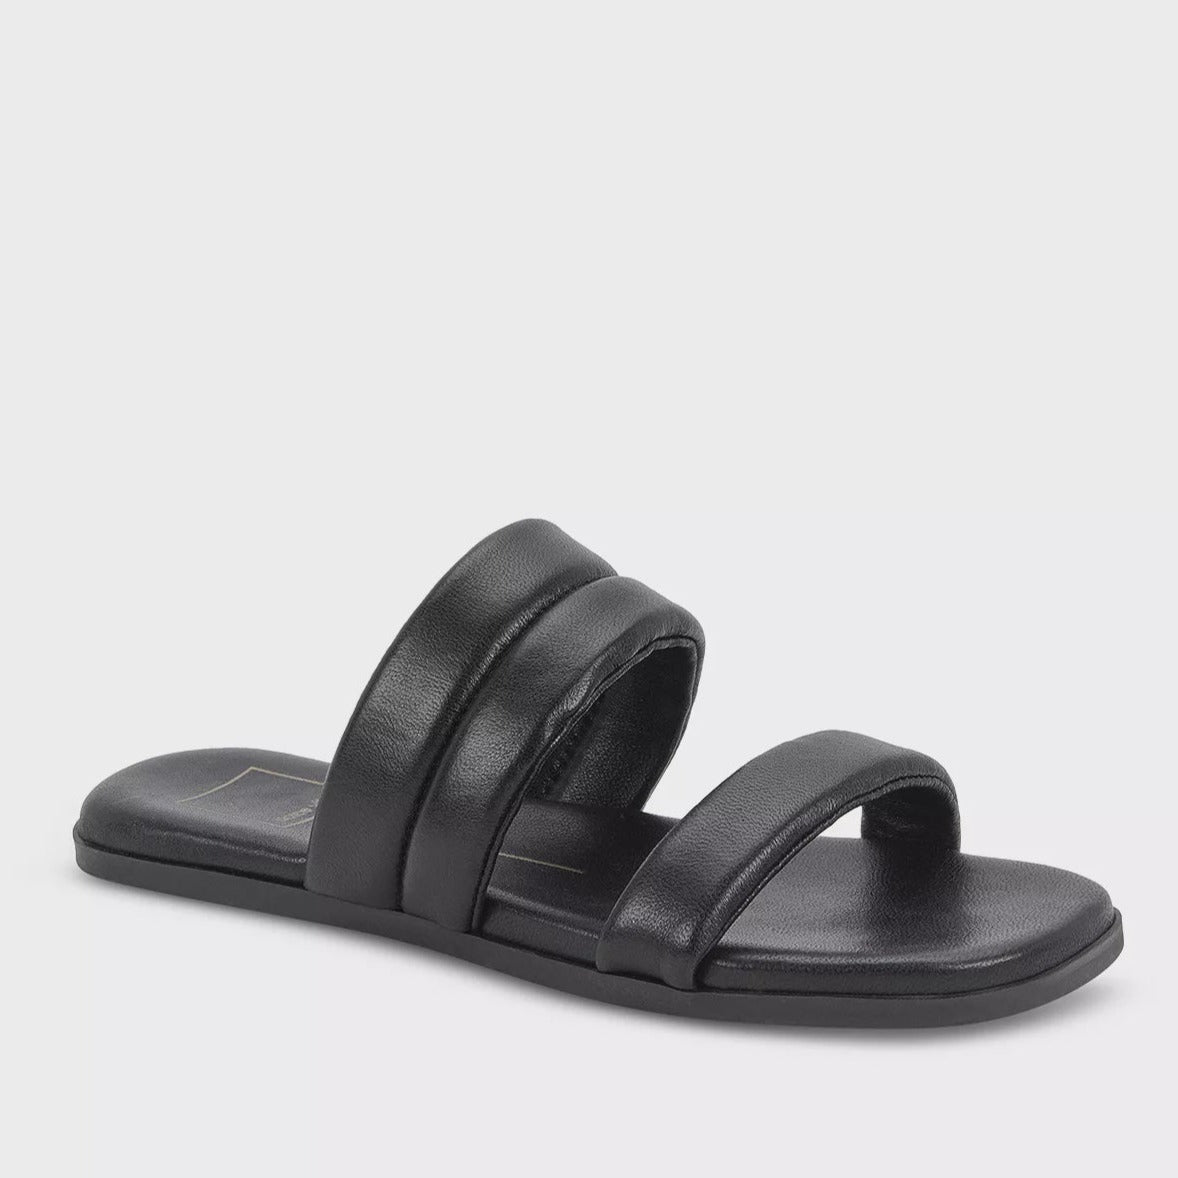 Dolce Vita Adore Italian made Low Slide in black leather